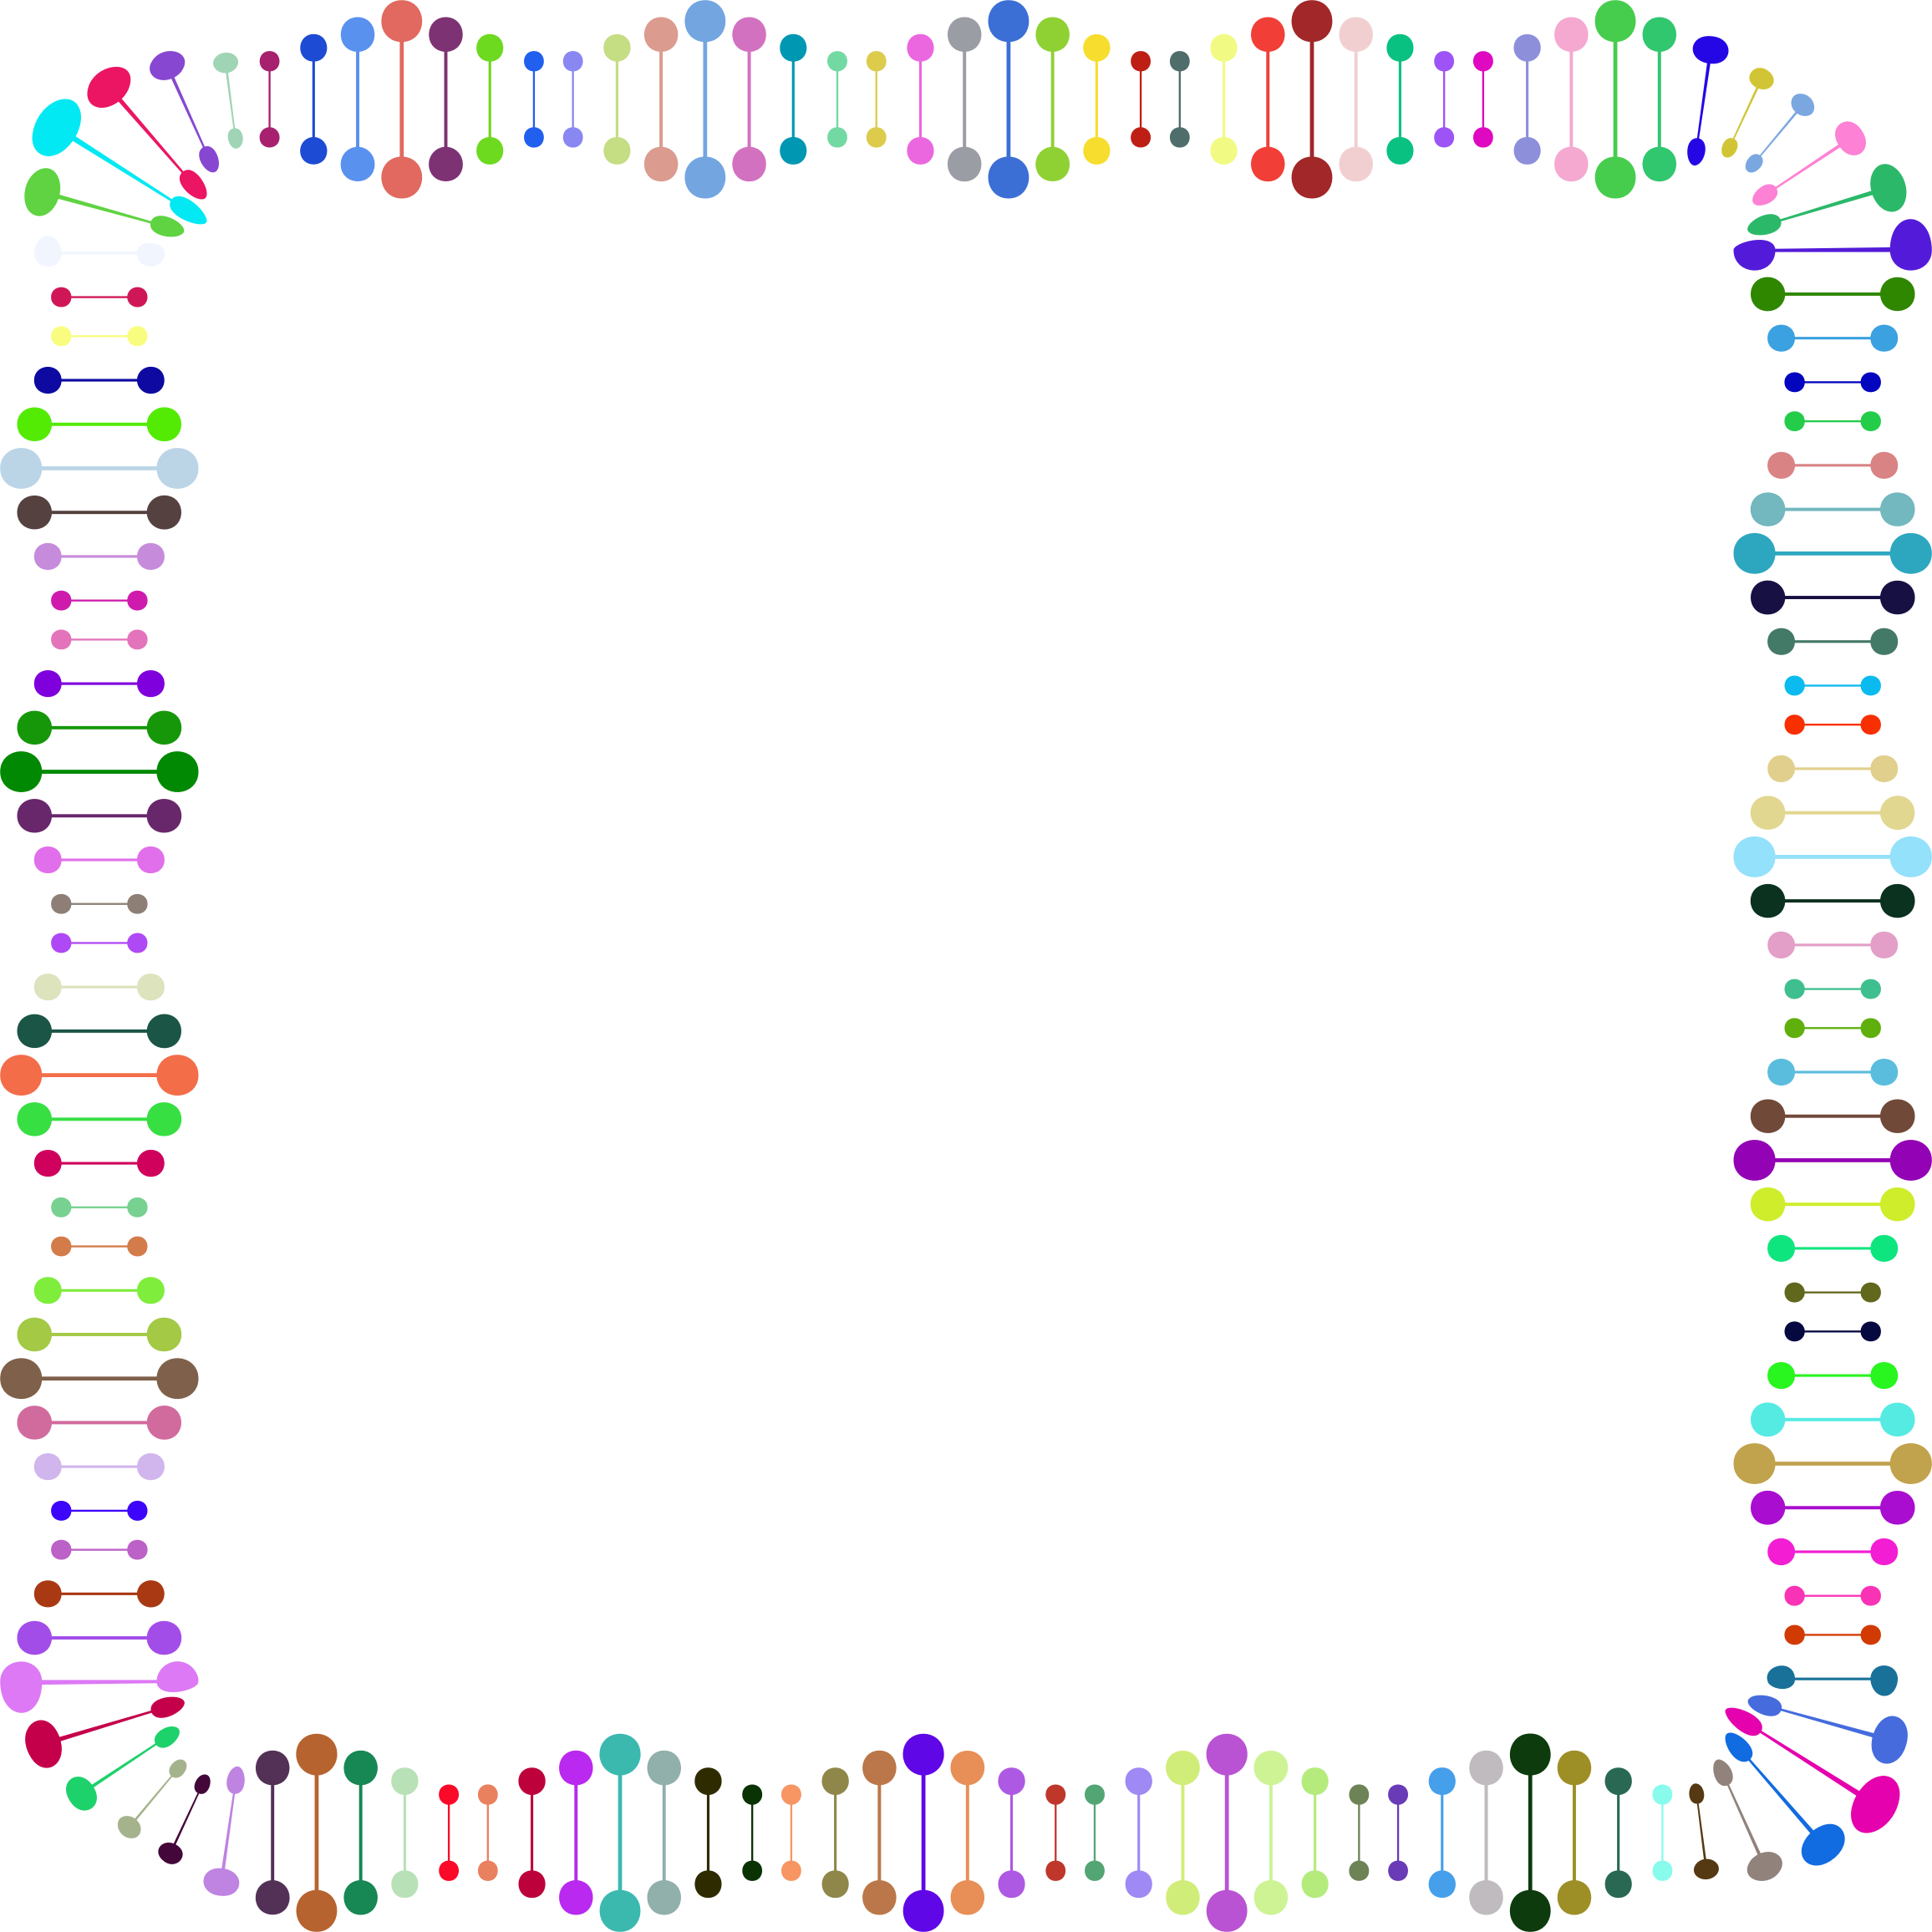 dna clipart file